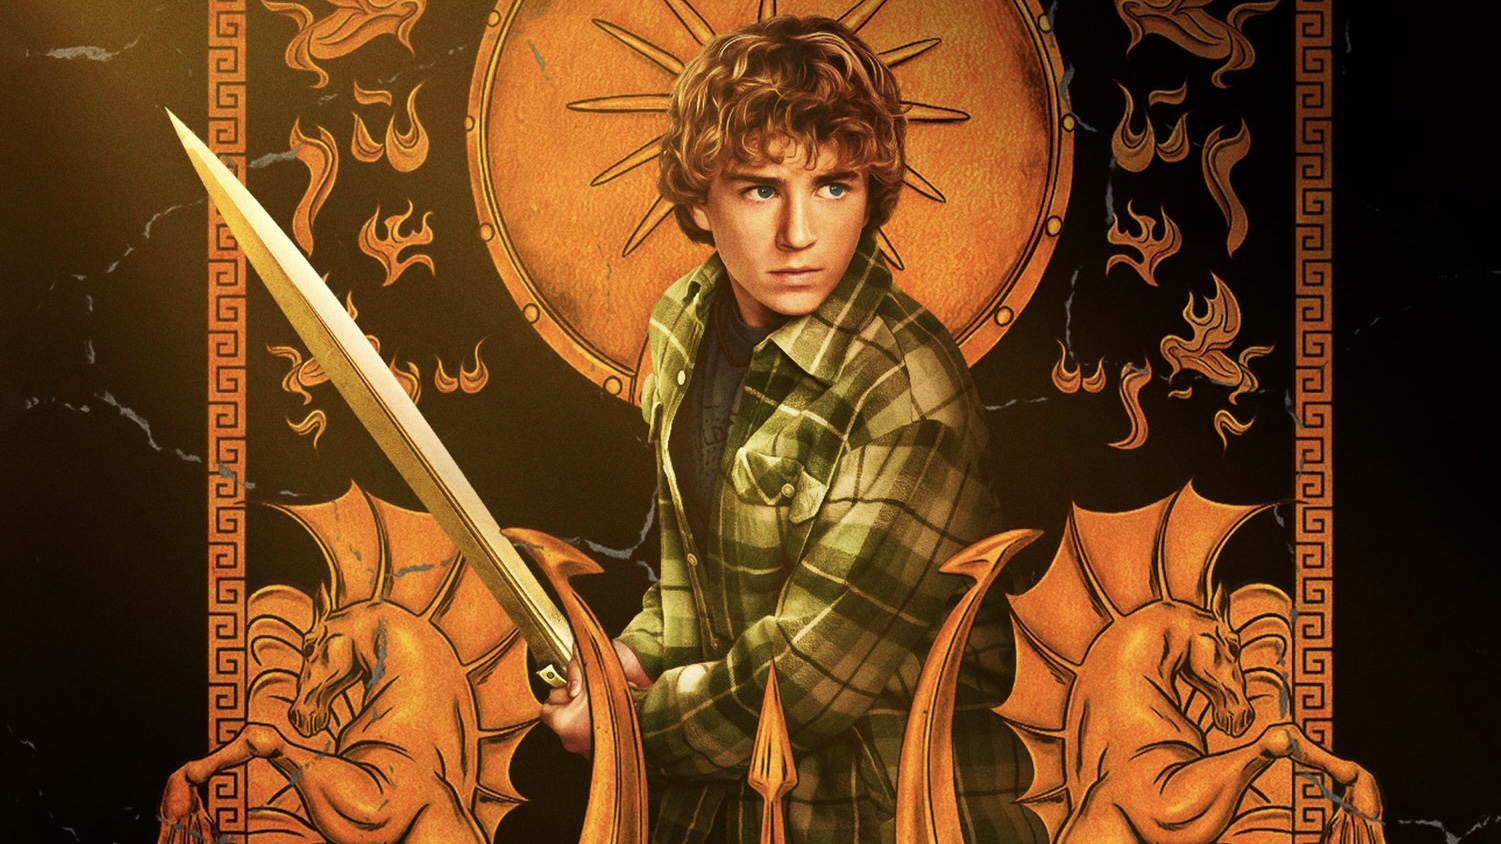 SEE IT: First Character Posters From ‘Percy Jackson’ Series Revealed